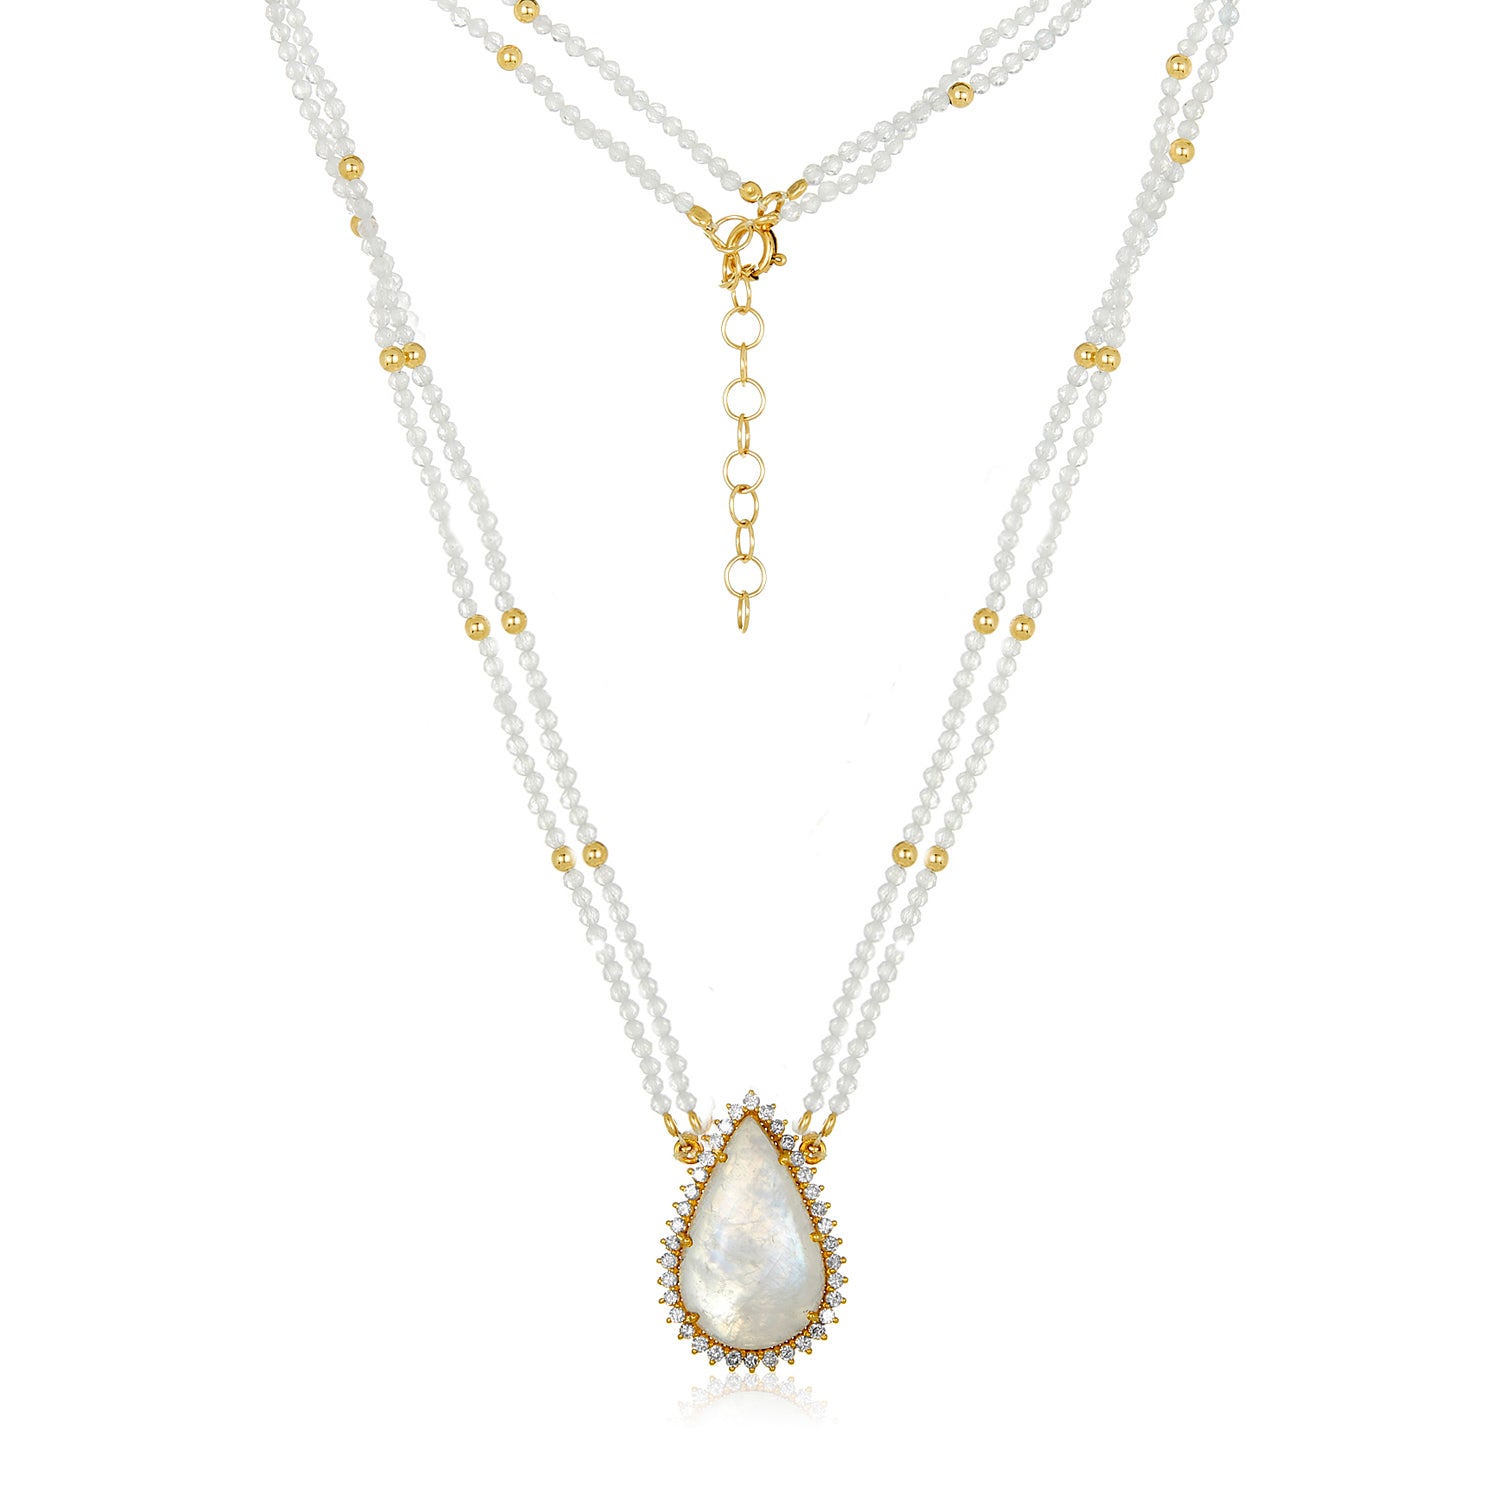 Dianna Moonstone Necklace in 14k